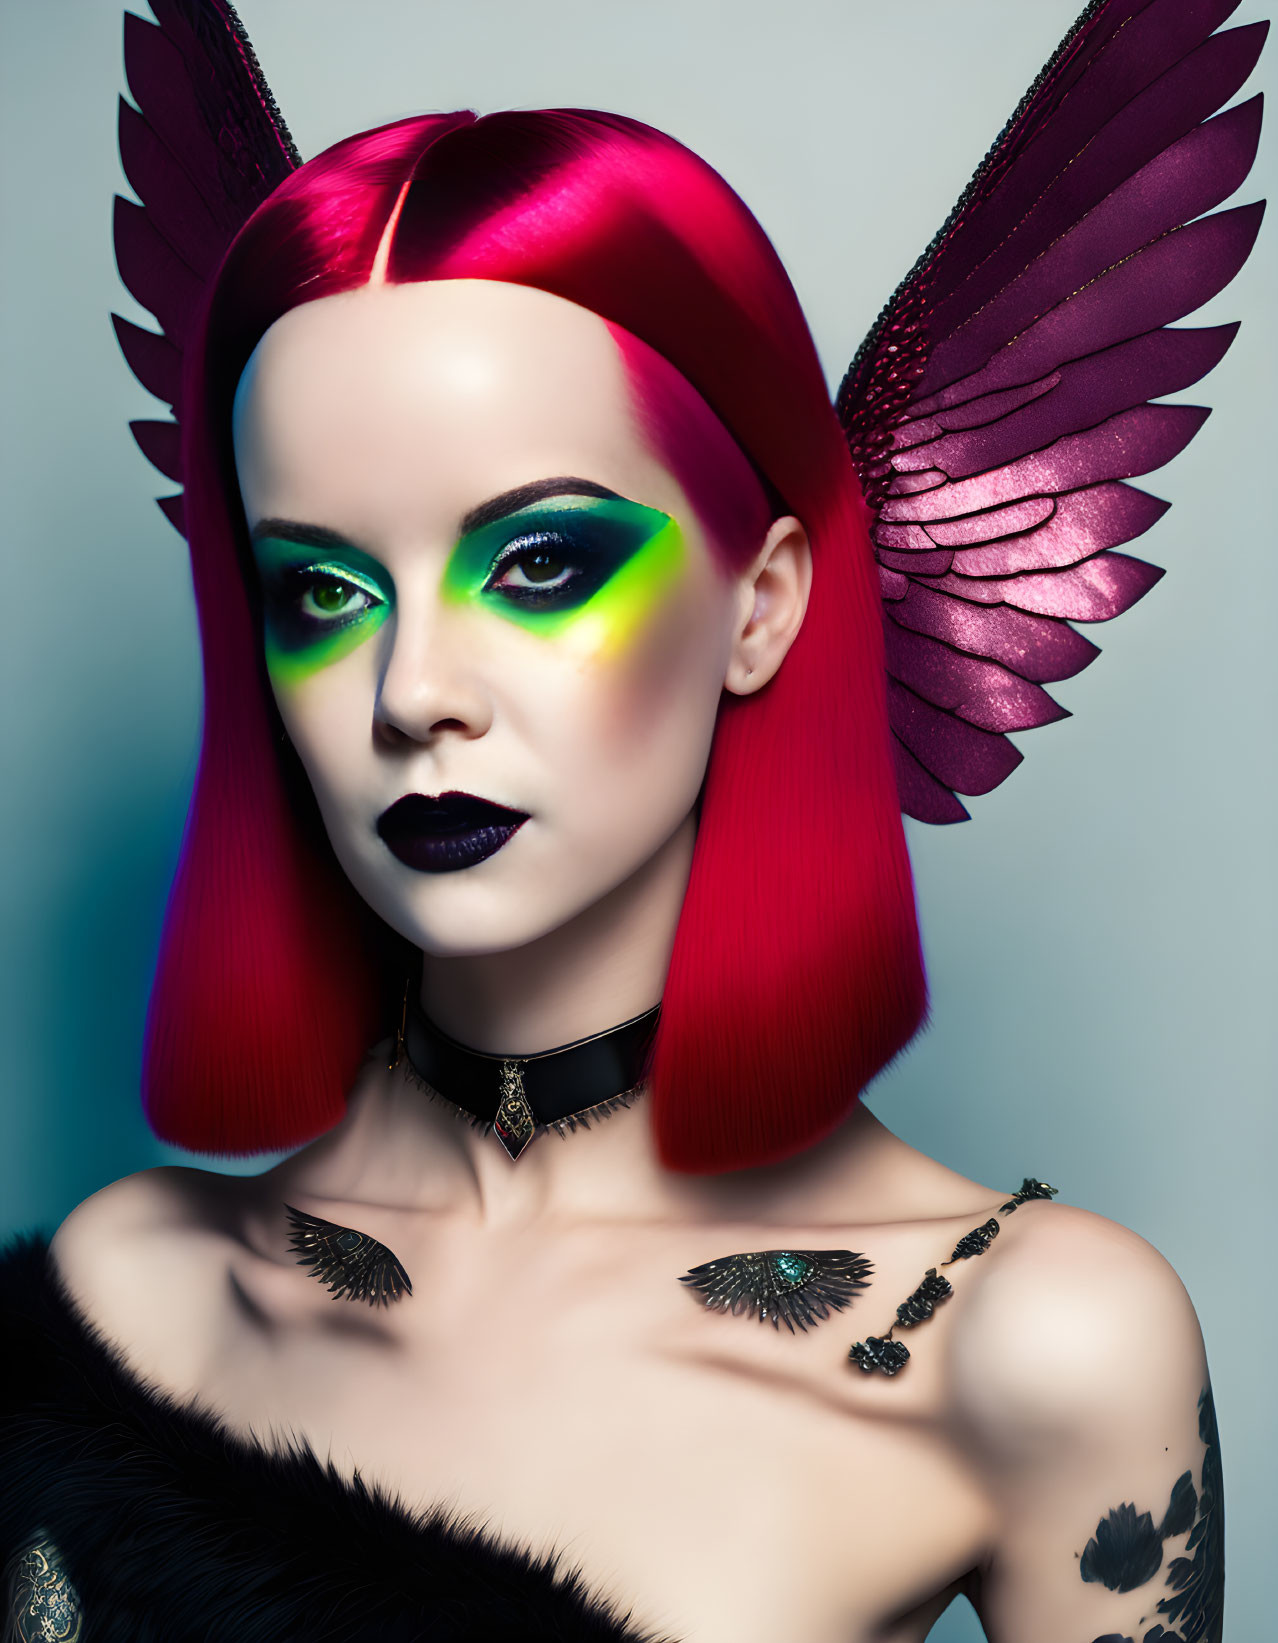 Red-haired woman with colorful eye makeup and dark feathered accessories in a fantasy setting